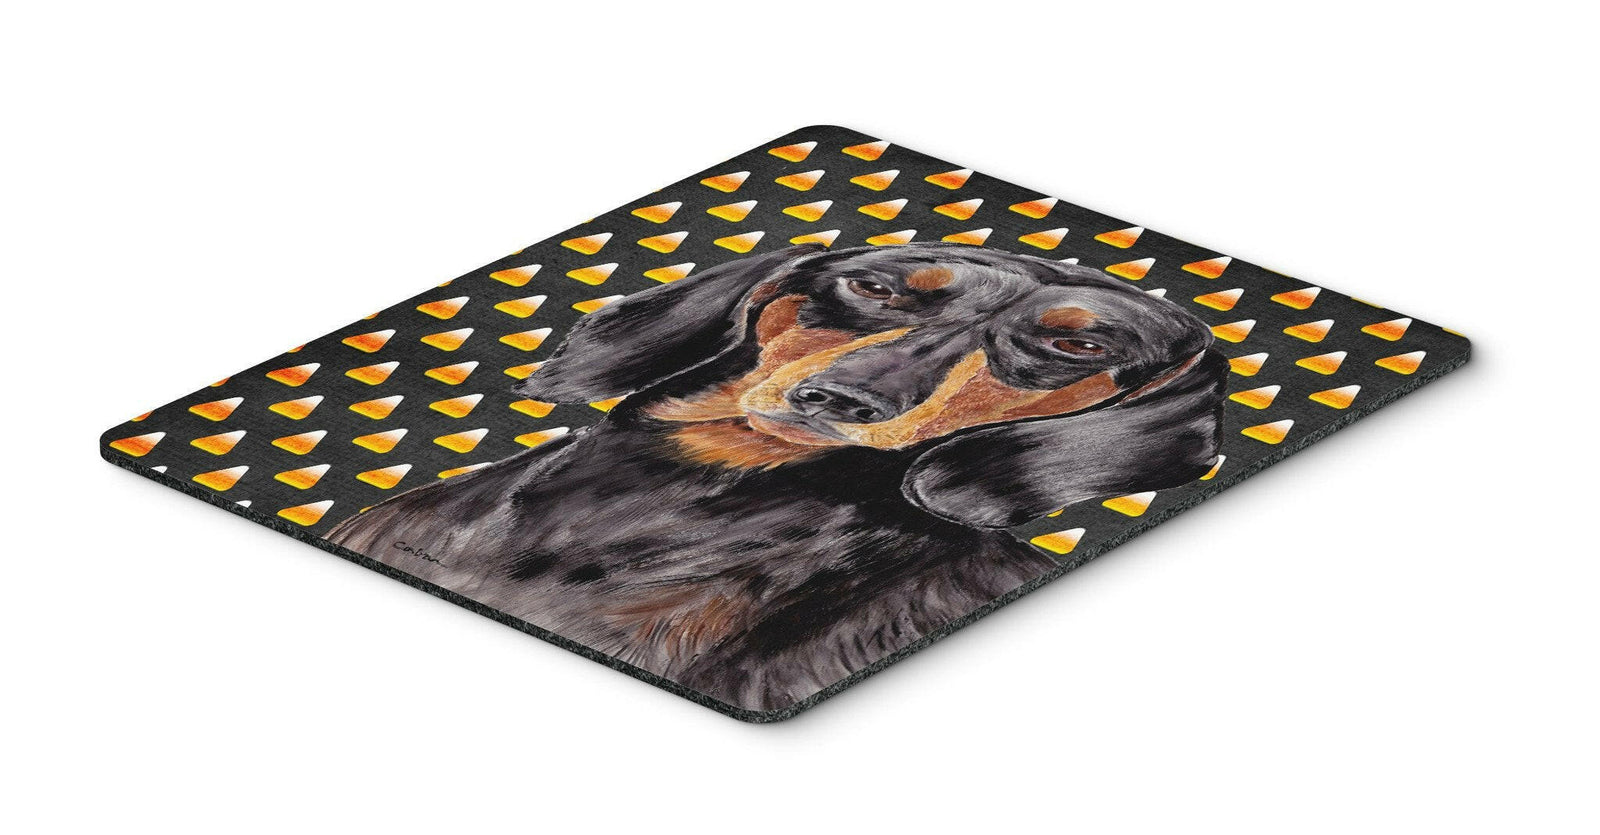 Dachshund Candy Corn Halloween Portrait Mouse Pad, Hot Pad or Trivet by Caroline's Treasures